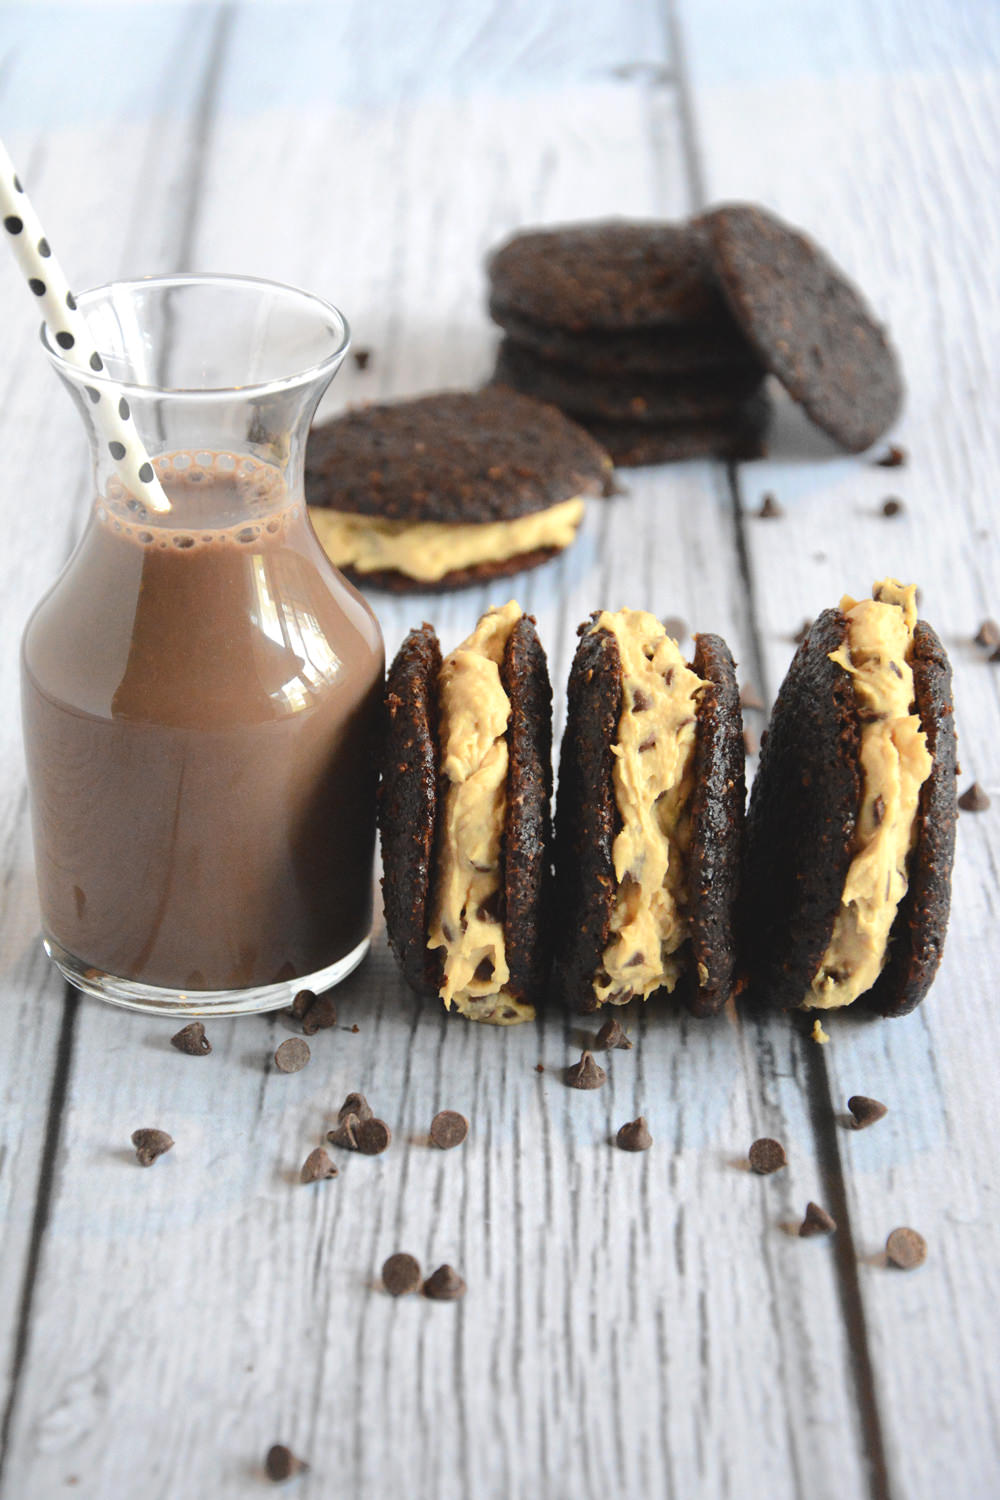 Cookie Dough Stuffed Whoopie Pies are a guiltless treat with a chocolate cookie and stuffed with cookie dough that only seems sinful!